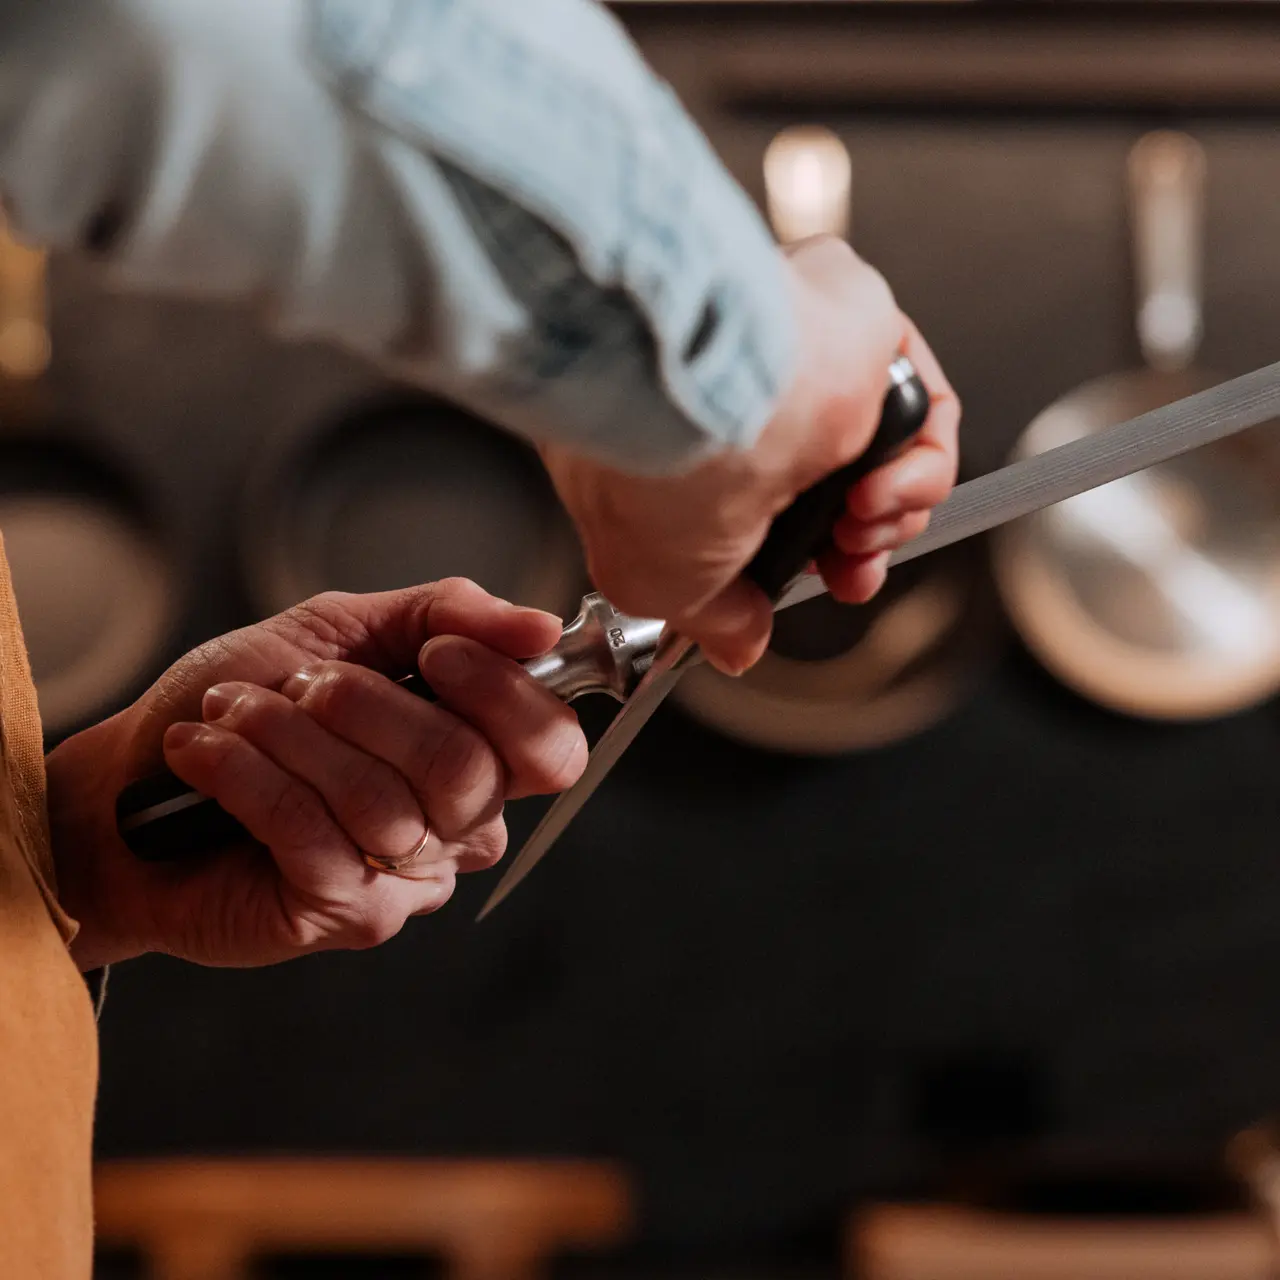 A person sharpens a knife with a honing tool in a kitchen setting.